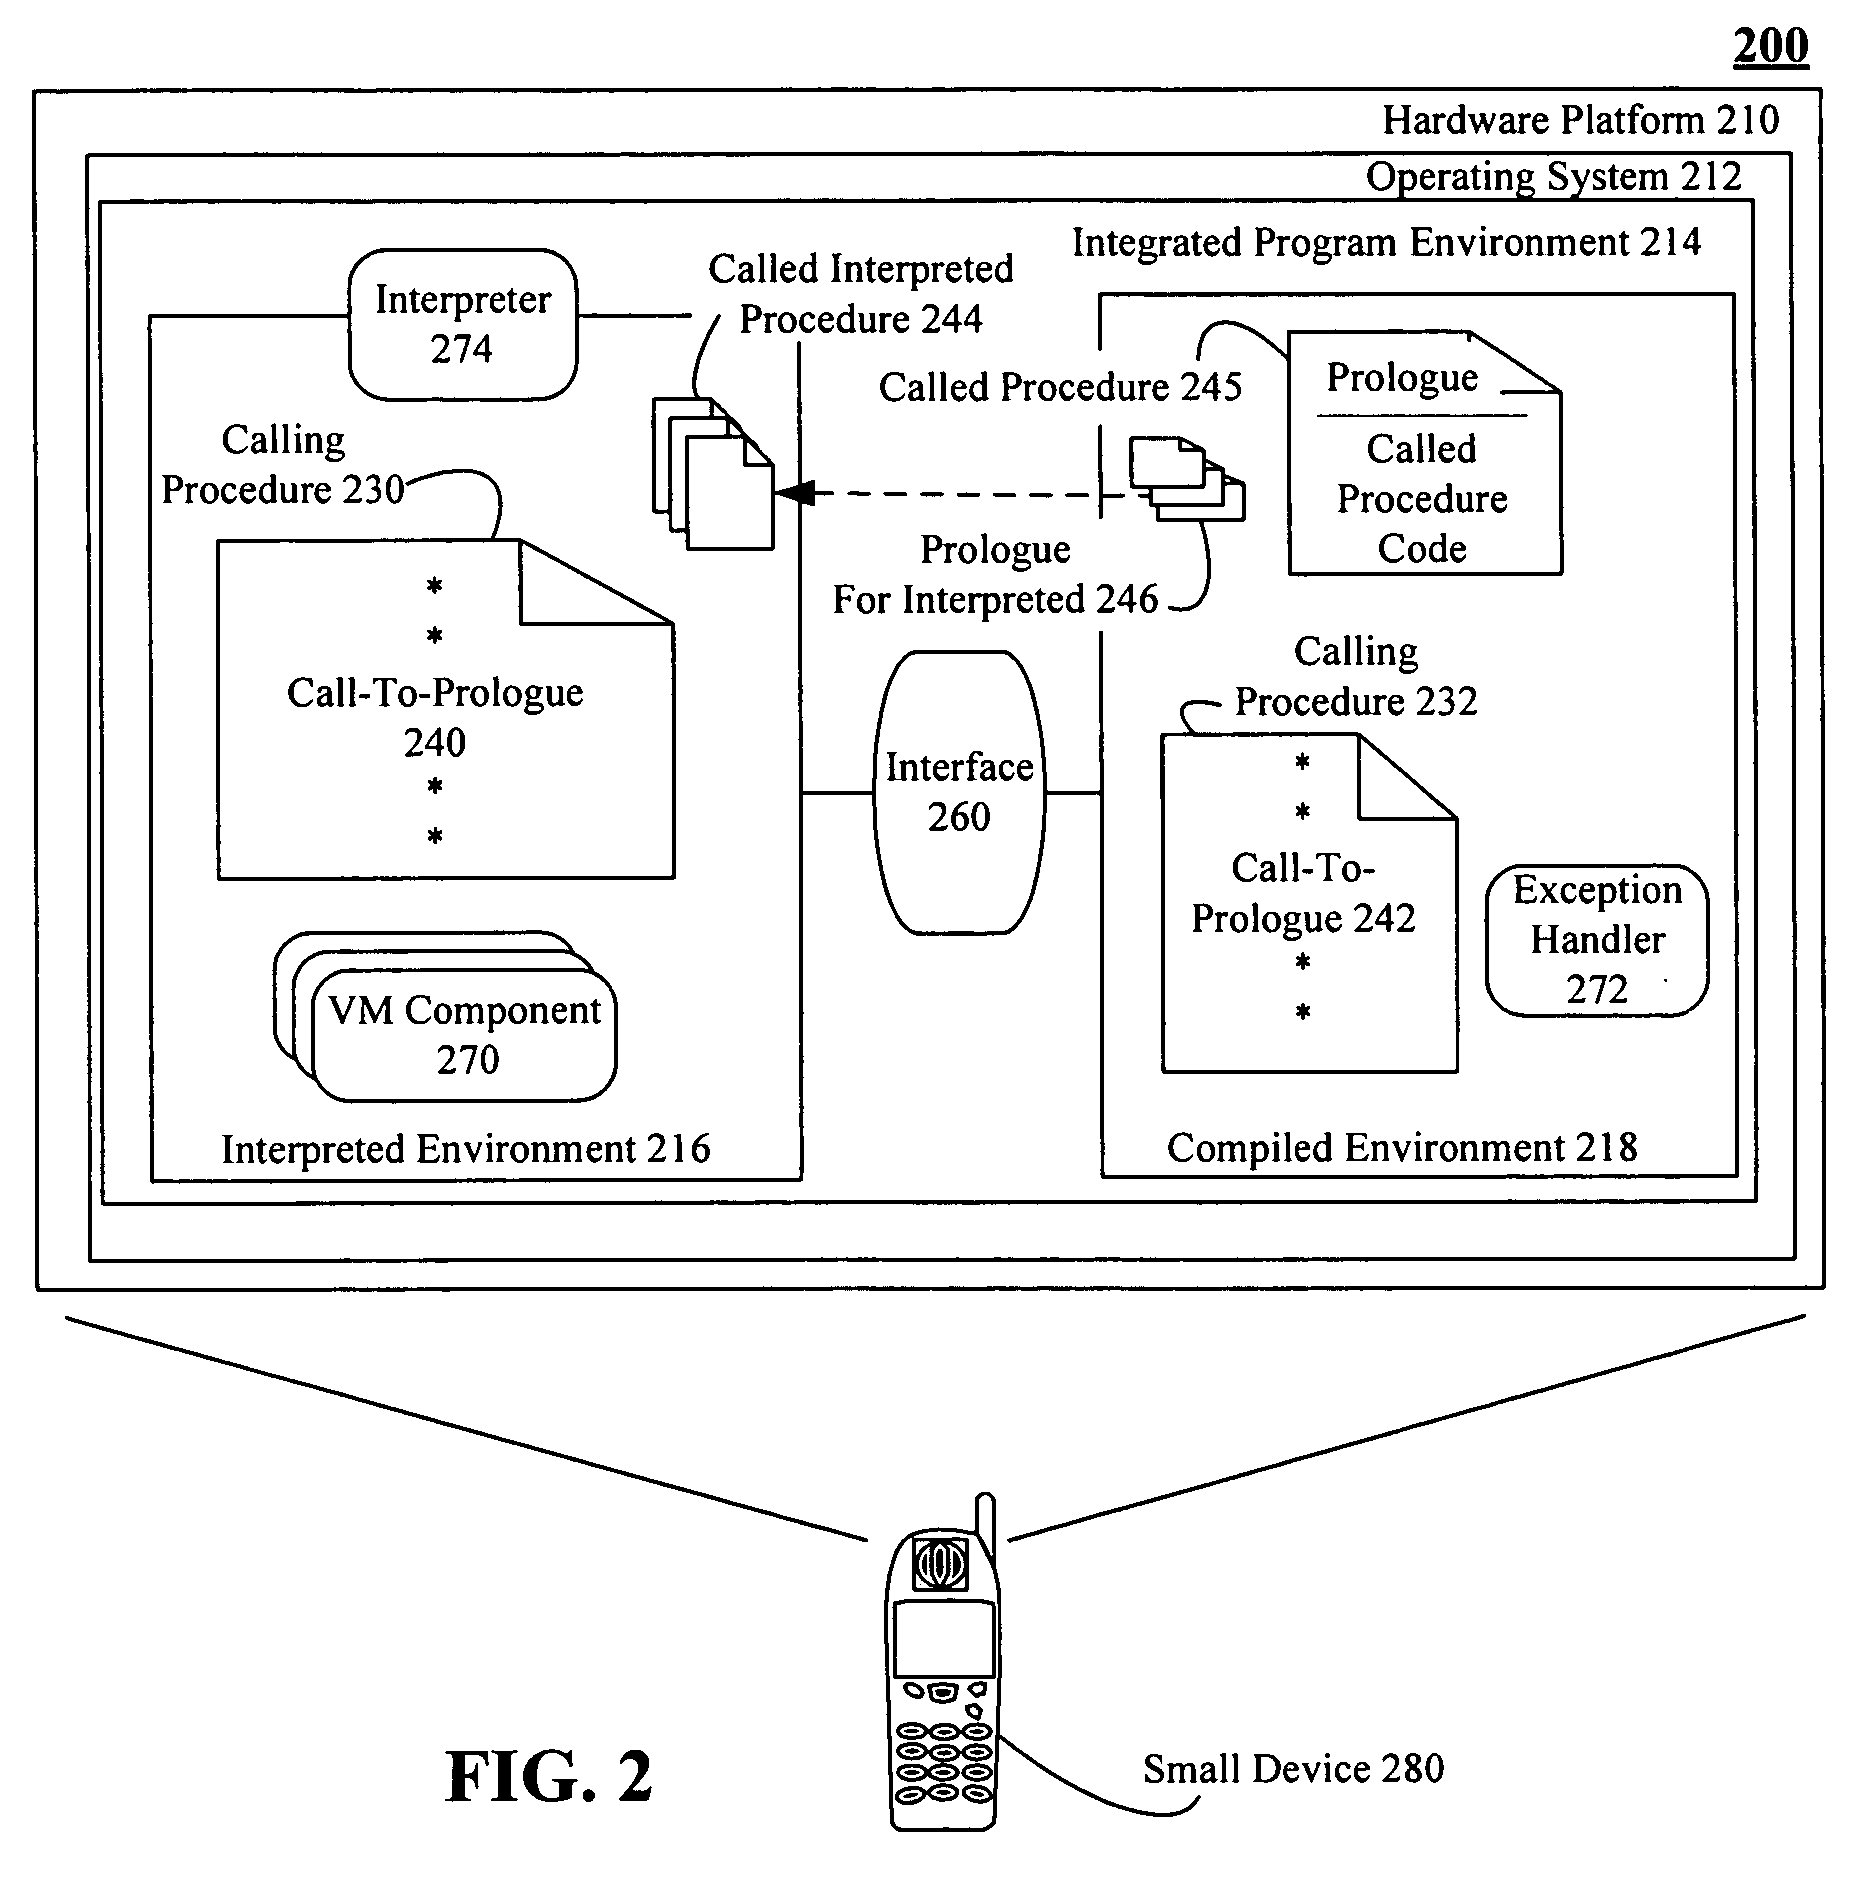 Procedure invocation in an integrated computing environment having both compiled and interpreted code segments